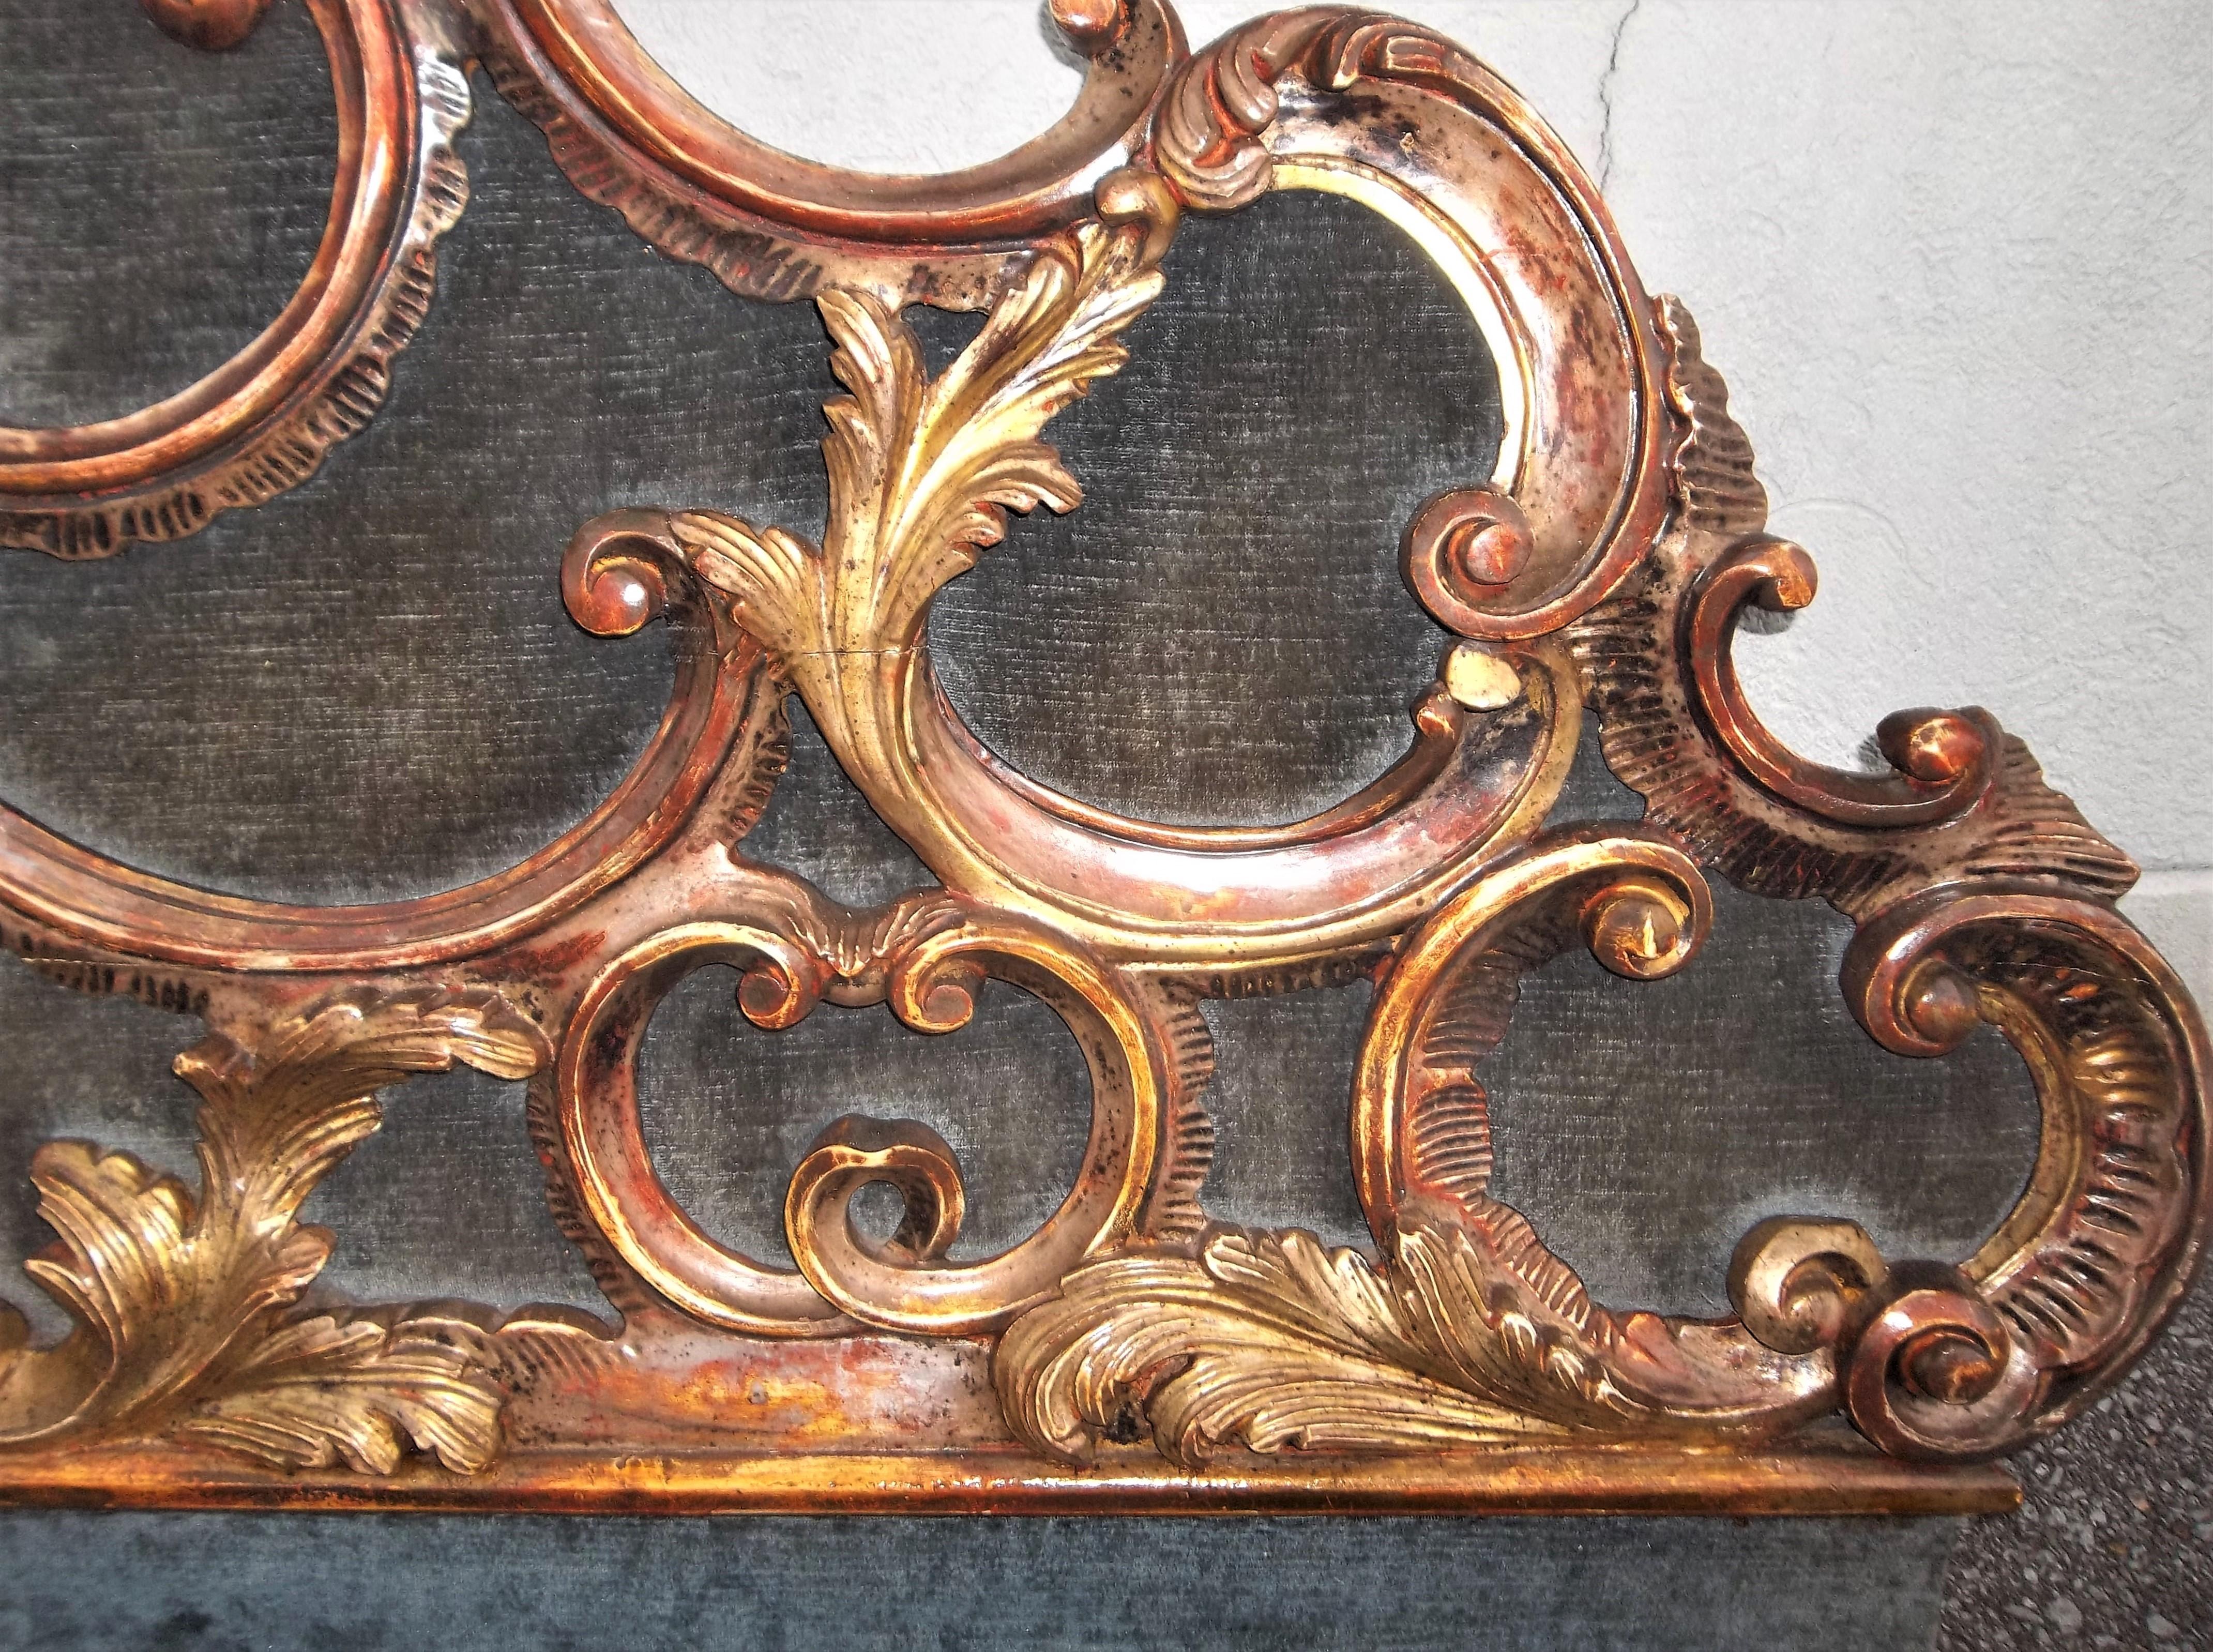 Venetian or Italian Giltwood Robustly Carved Headboard in Rococo Style 9